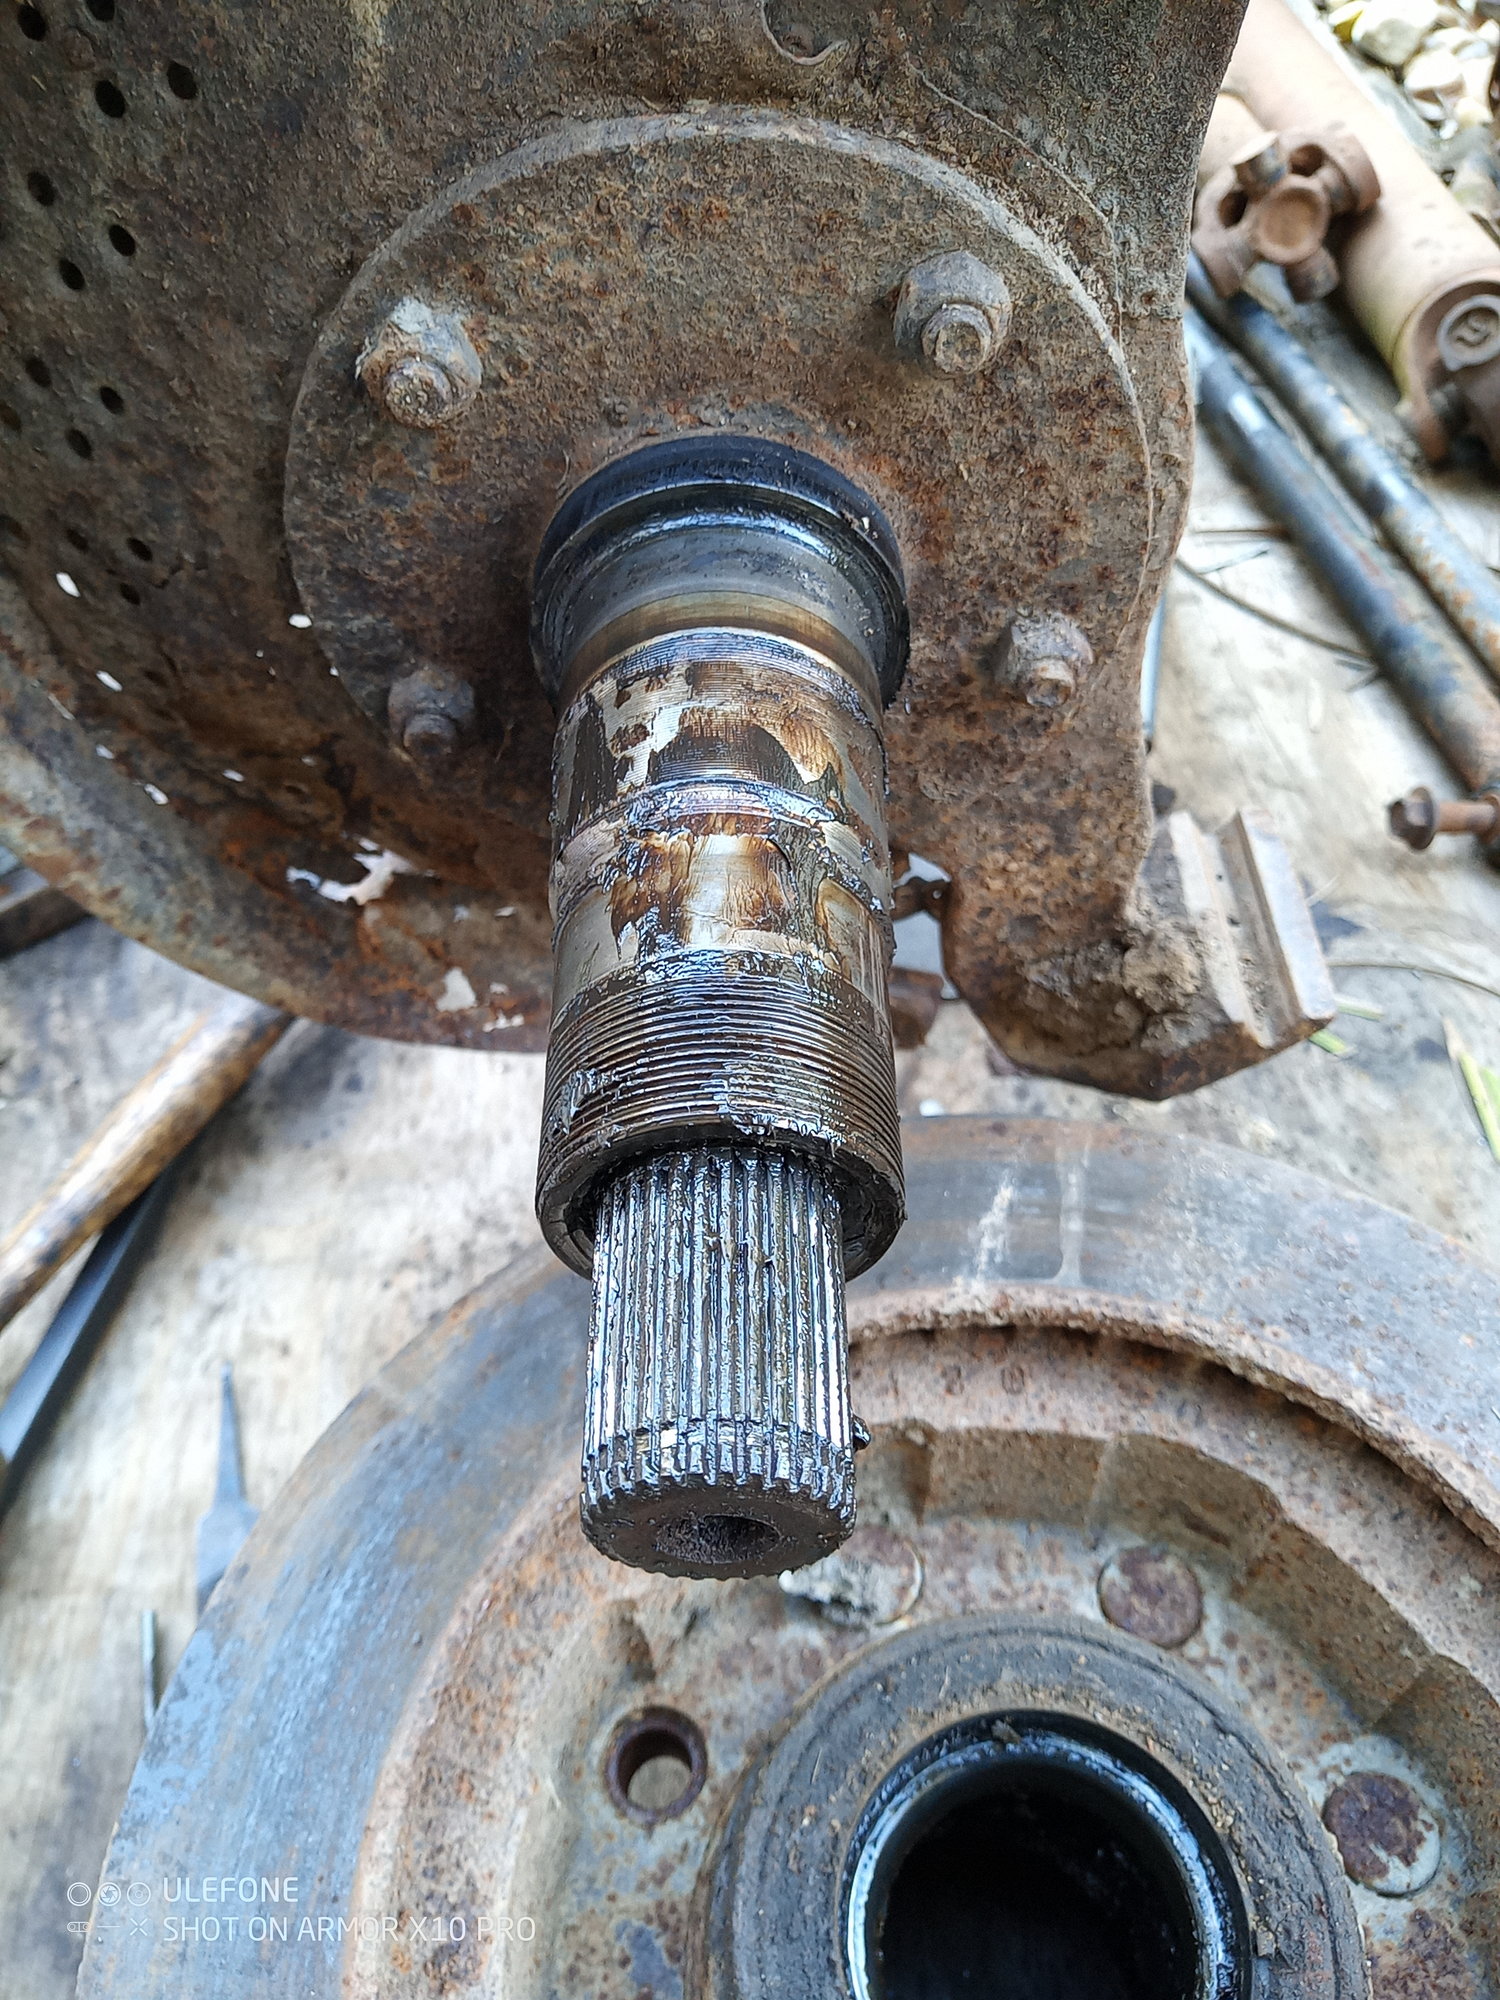 Trailer axle HELP! Is the spindle repairable/usable and what is